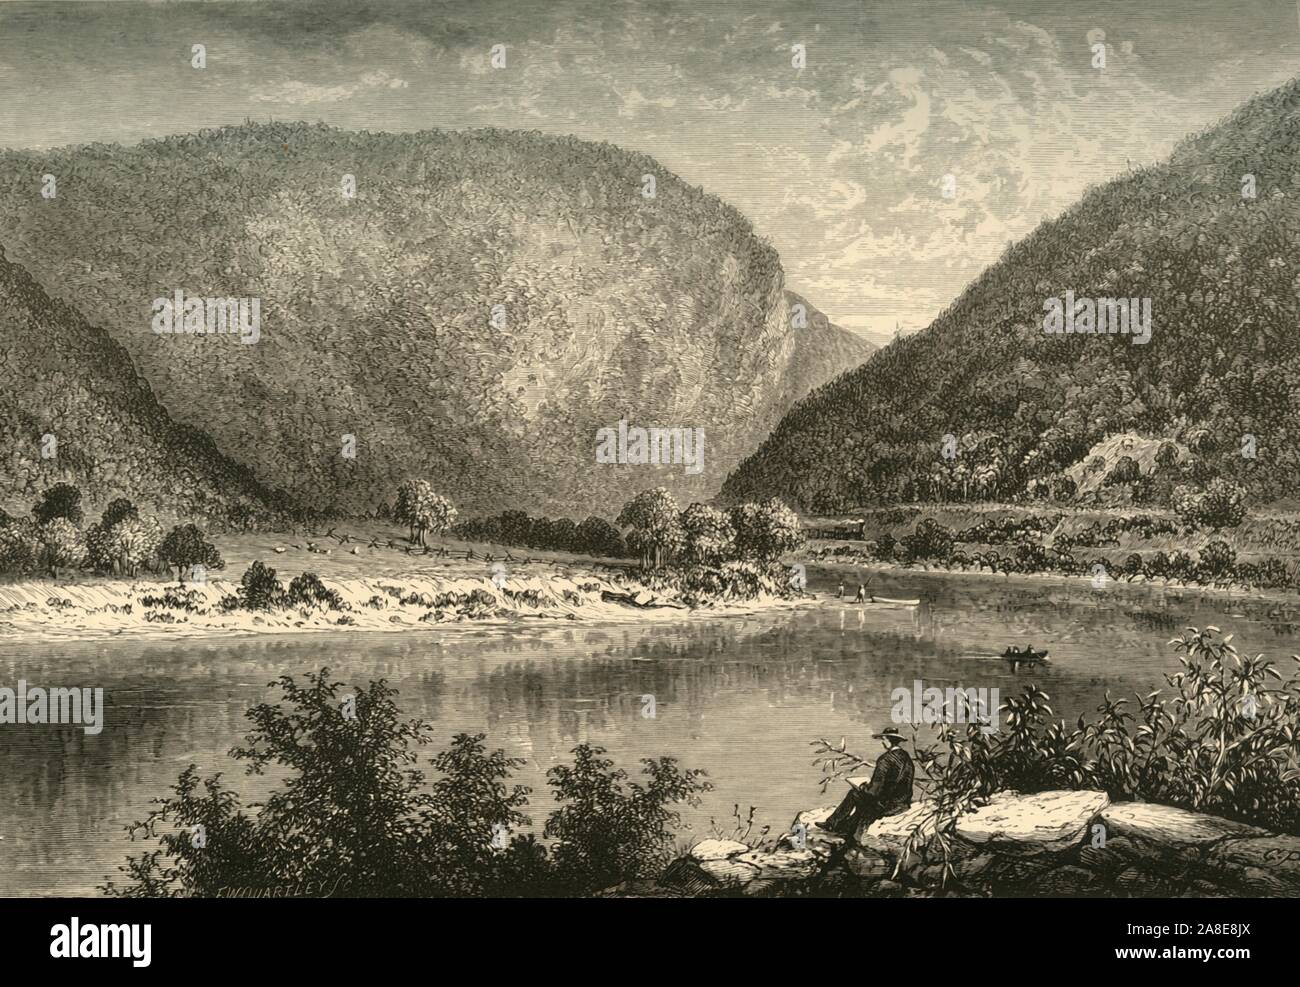 'Delaware Water-Gap', 1872. View of the 'gap' where the Delaware River cuts through a ridge of the Appalachian Mountains on the border between New Jersey and Pennsylvania, USA. From &quot;Picturesque America; or, The Land We Live In, A Delineation by Pen and Pencil of the Mountains, Rivers, Lakes...with Illustrations on Steel and Wood by Eminent American Artists&quot; Vol. I, edited by William Cullen Bryant. [D. Appleton and Company, New York, 1872] Stock Photo